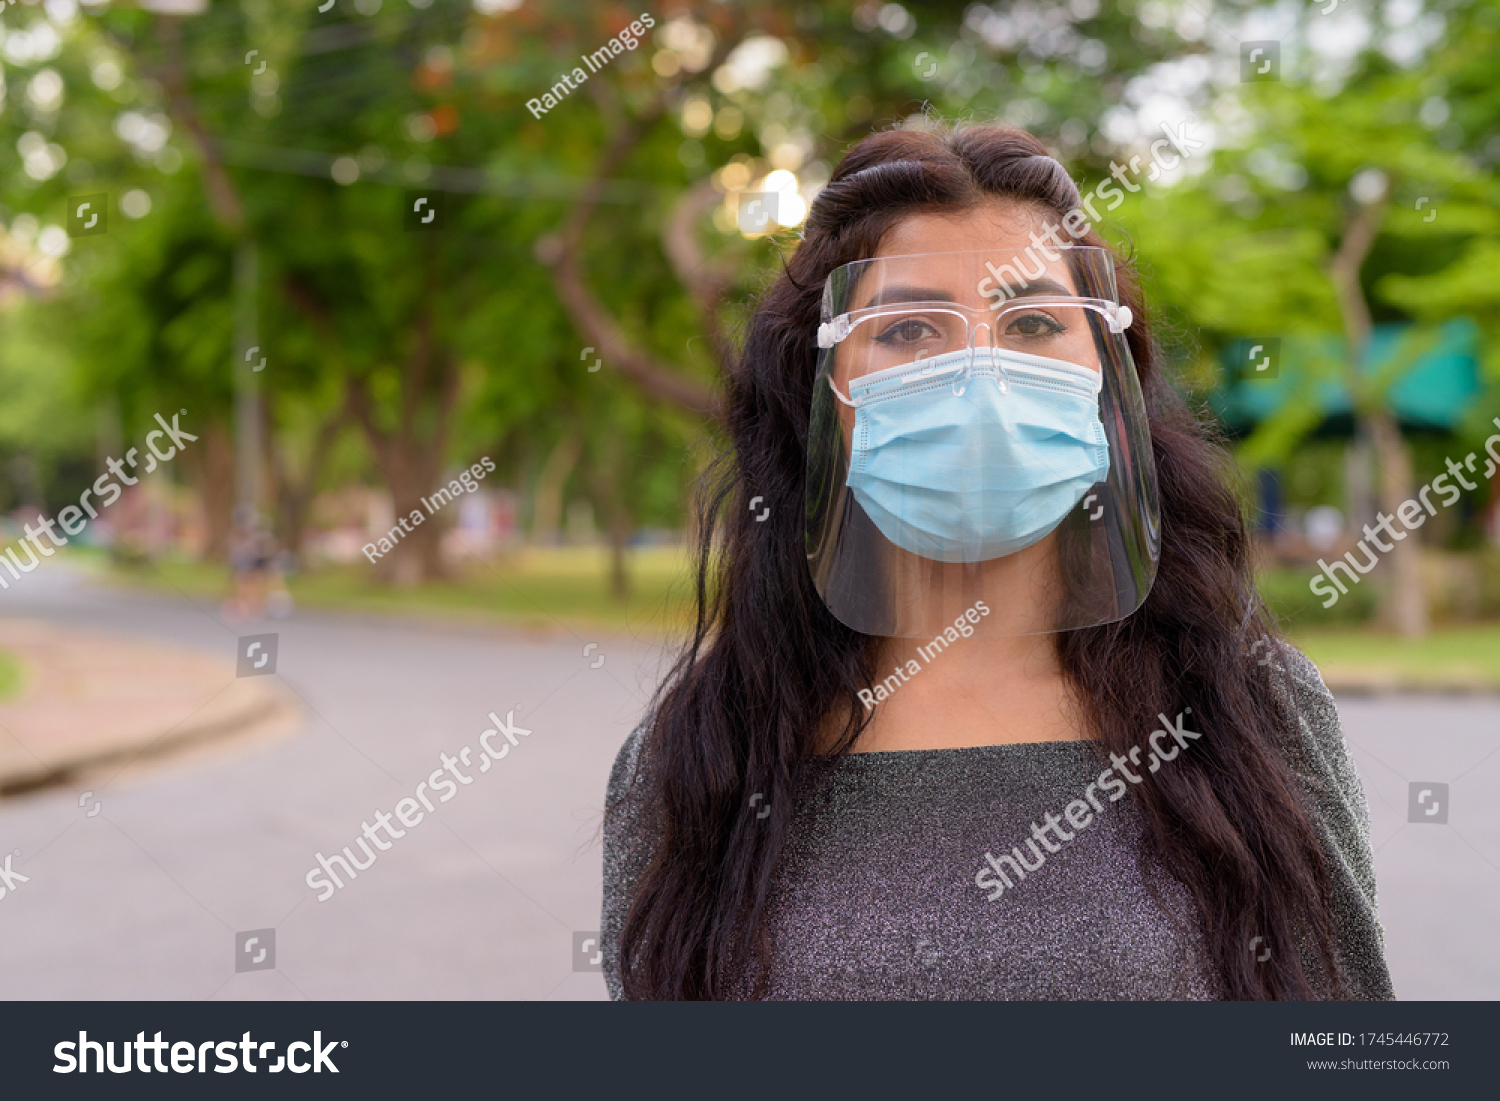 Face of young Indian woman wearing mask and face shield at the park outdoors #1745446772